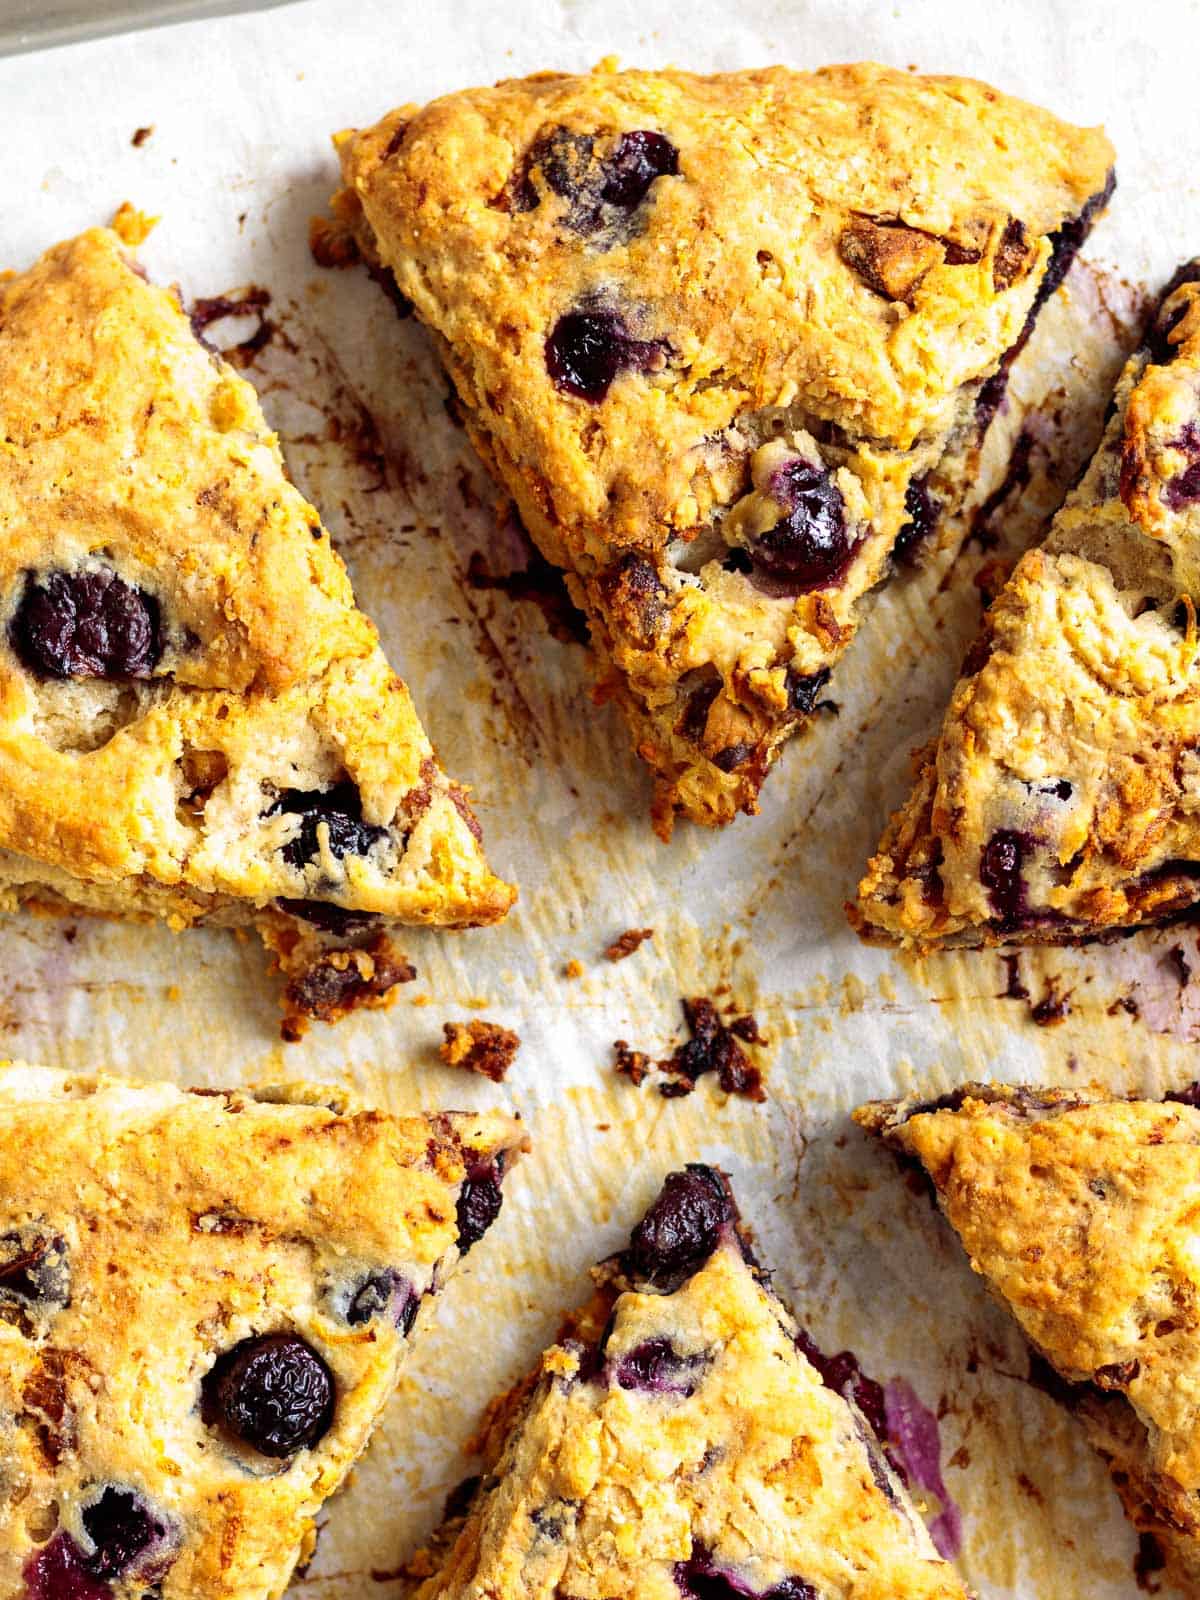 Golden brown blueberry scones are healthy.